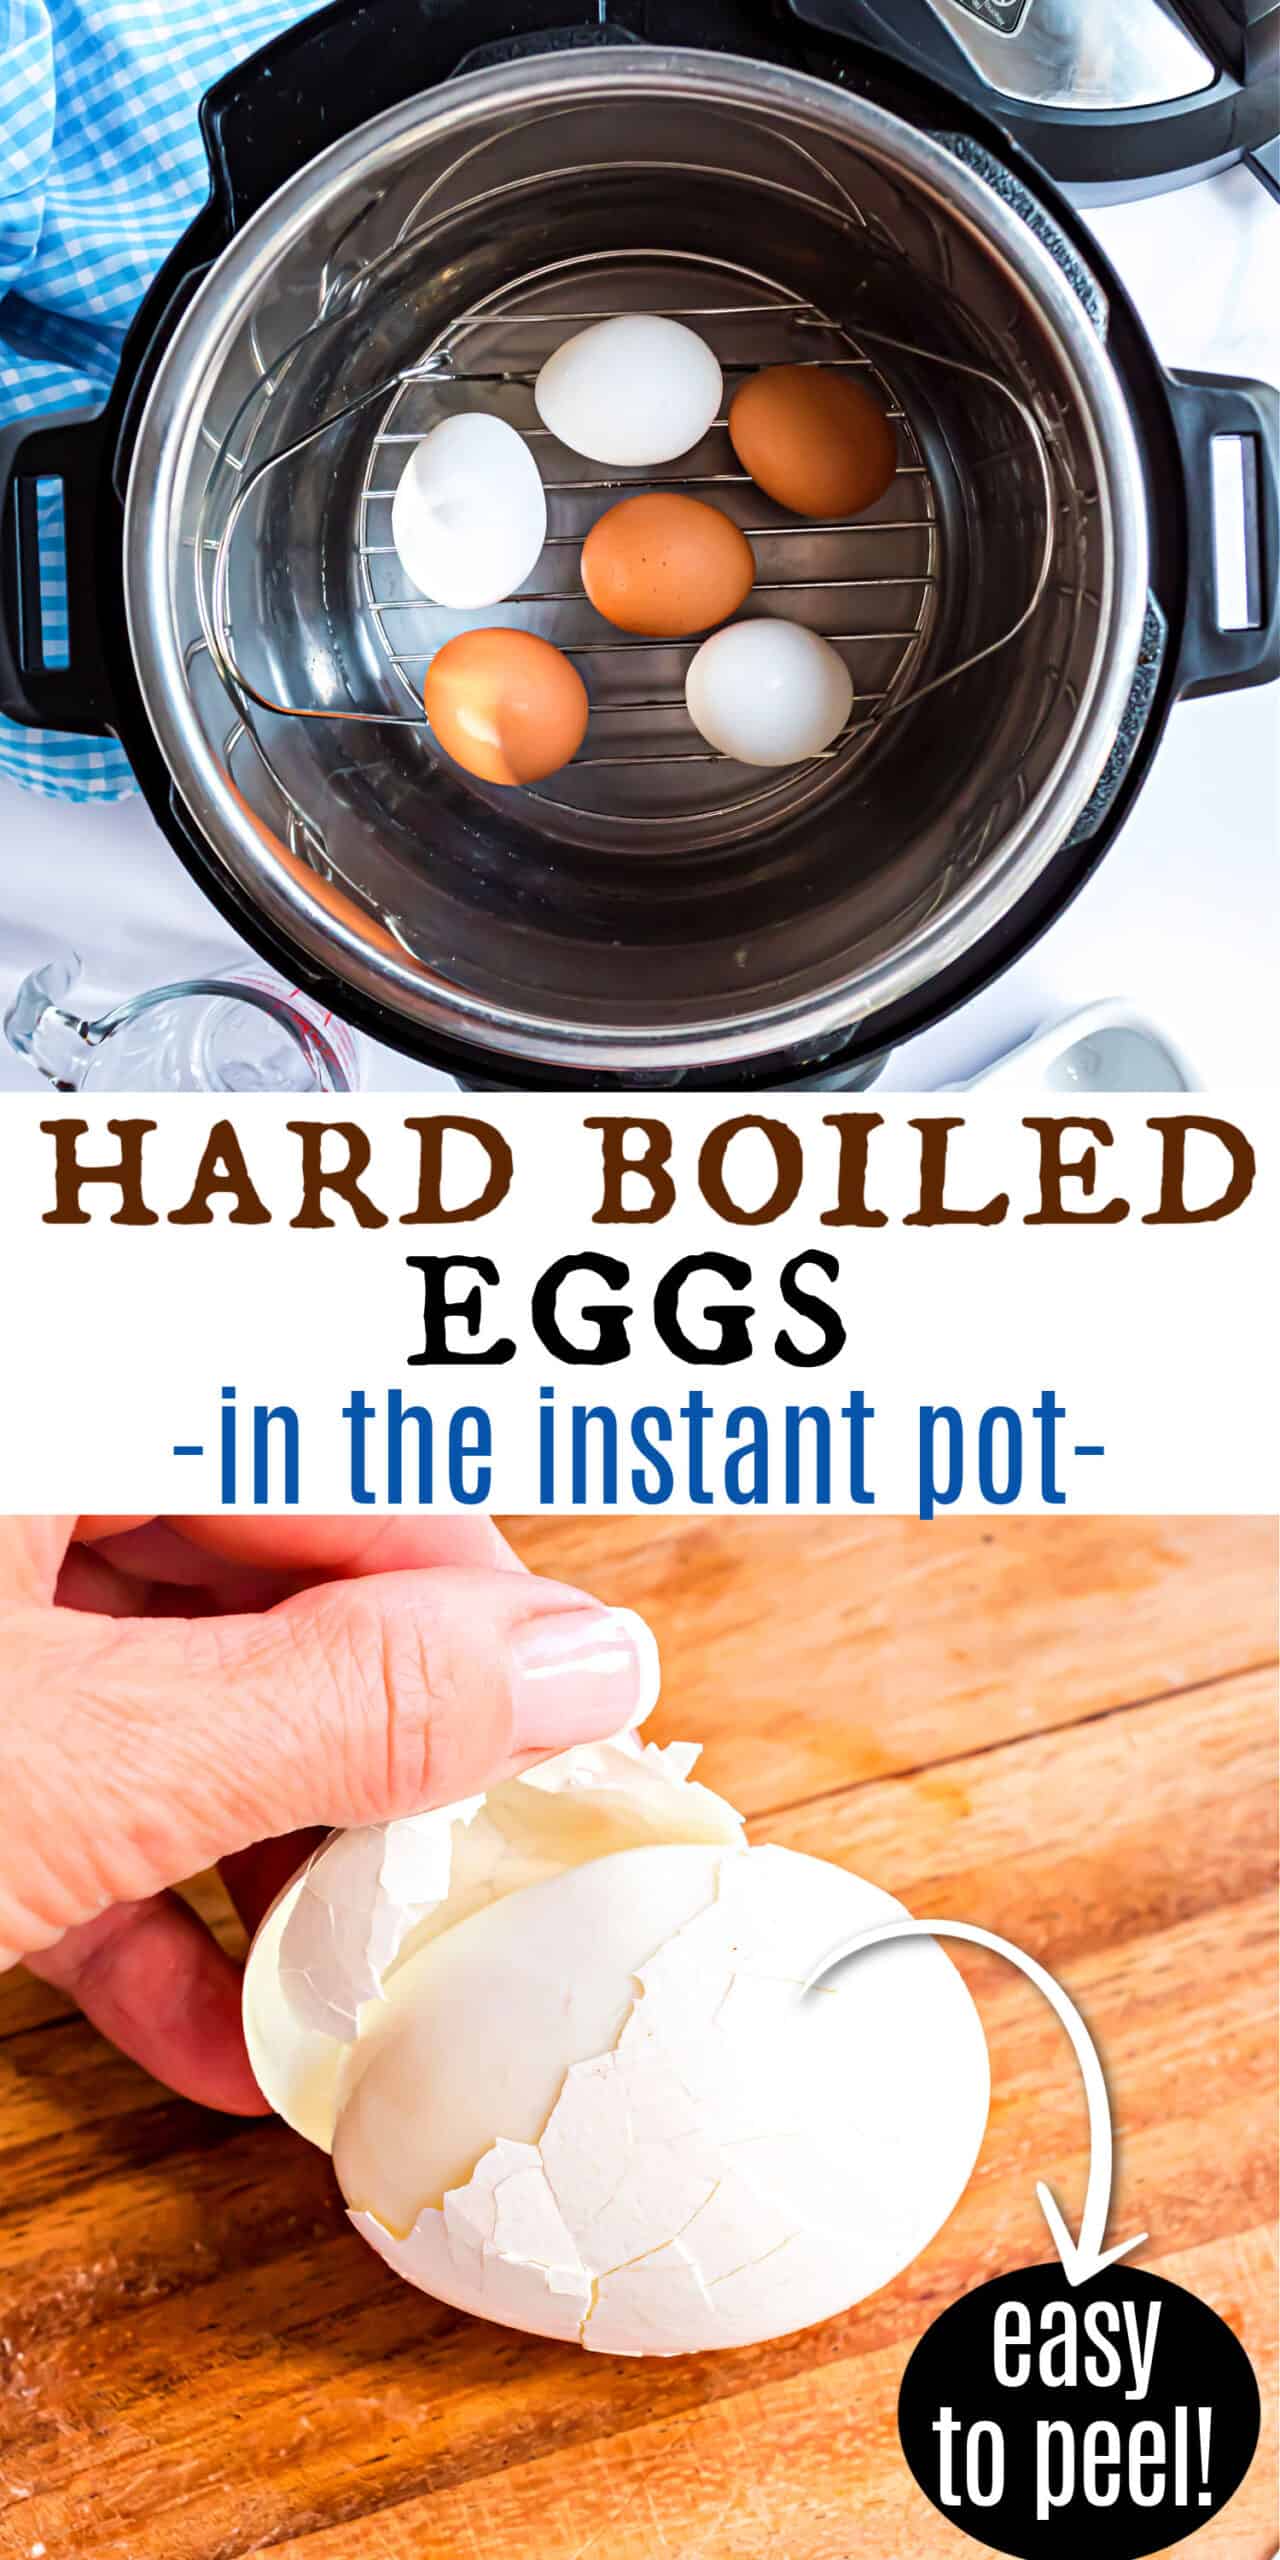 How to Make Instant Pot Hard Boiled Eggs - Shugary Sweets